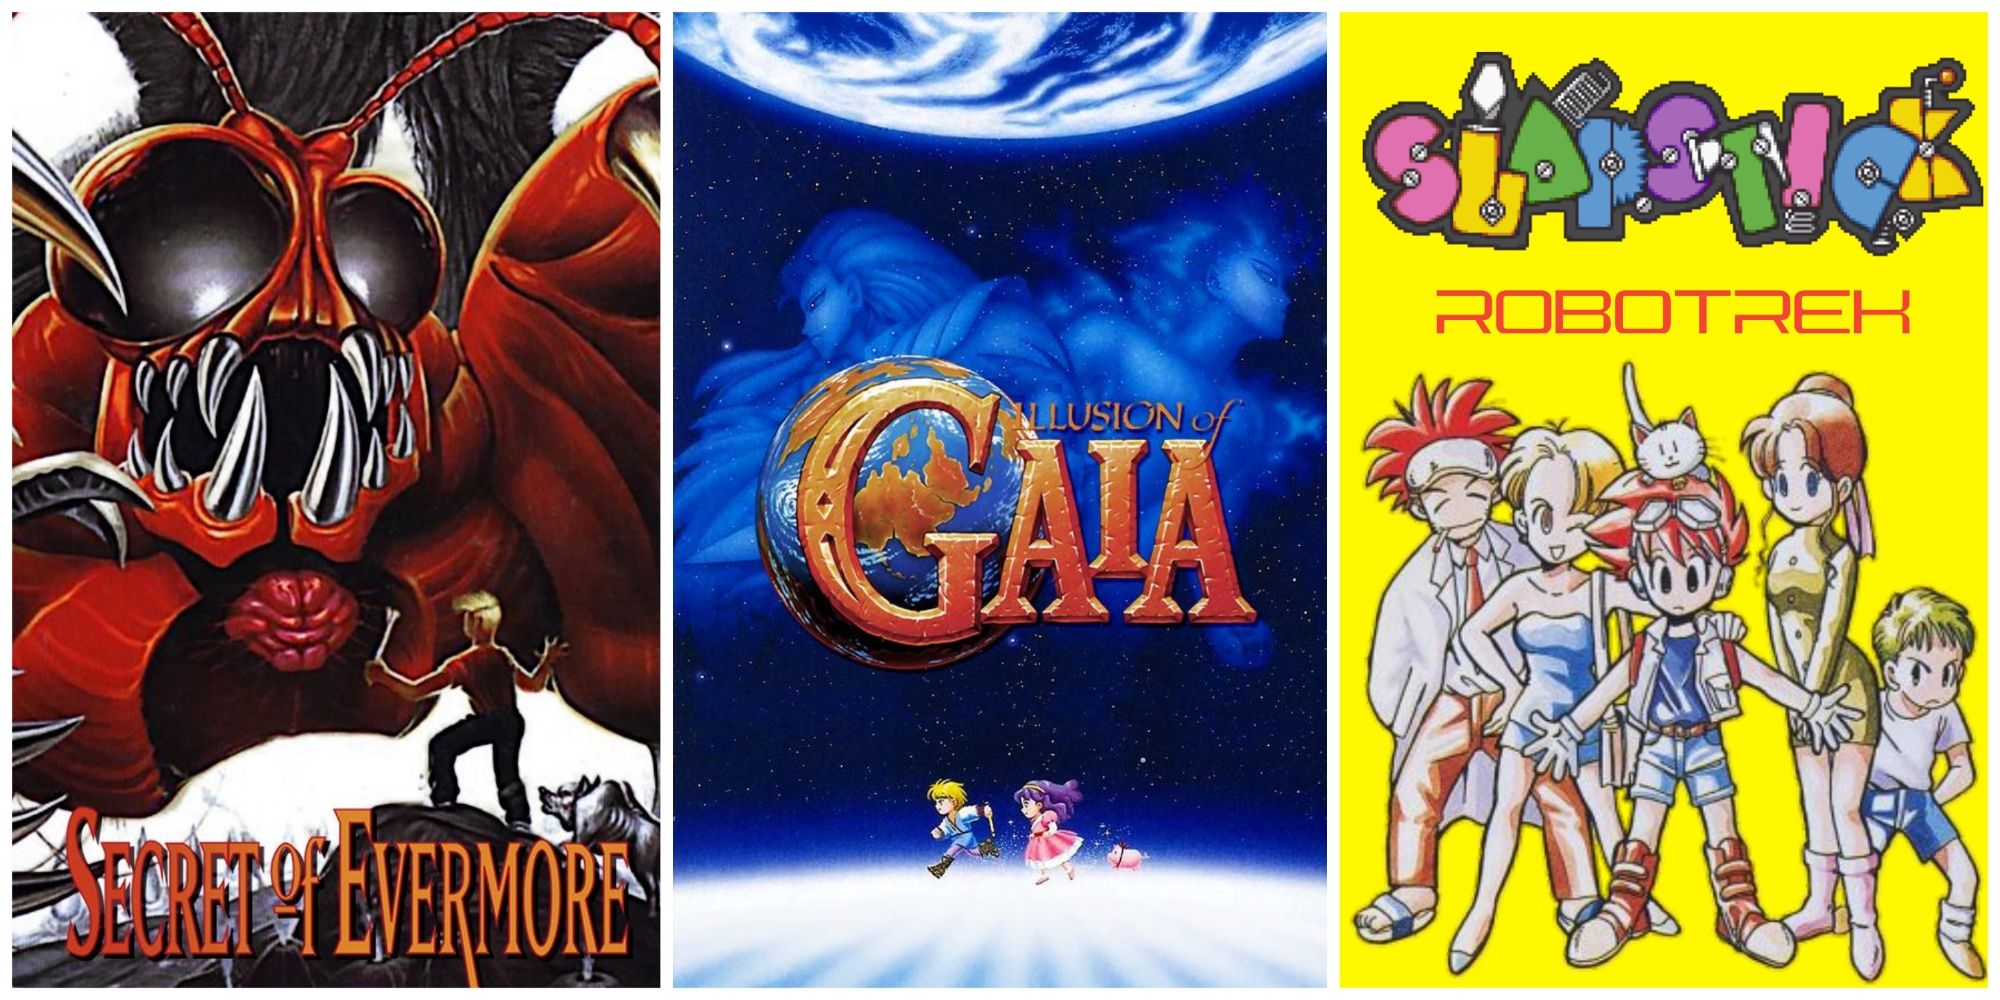 Collage of SNES game cover art: Secret of Evermore (left), Illusion of Gaia (middle), and Robotrek (right)